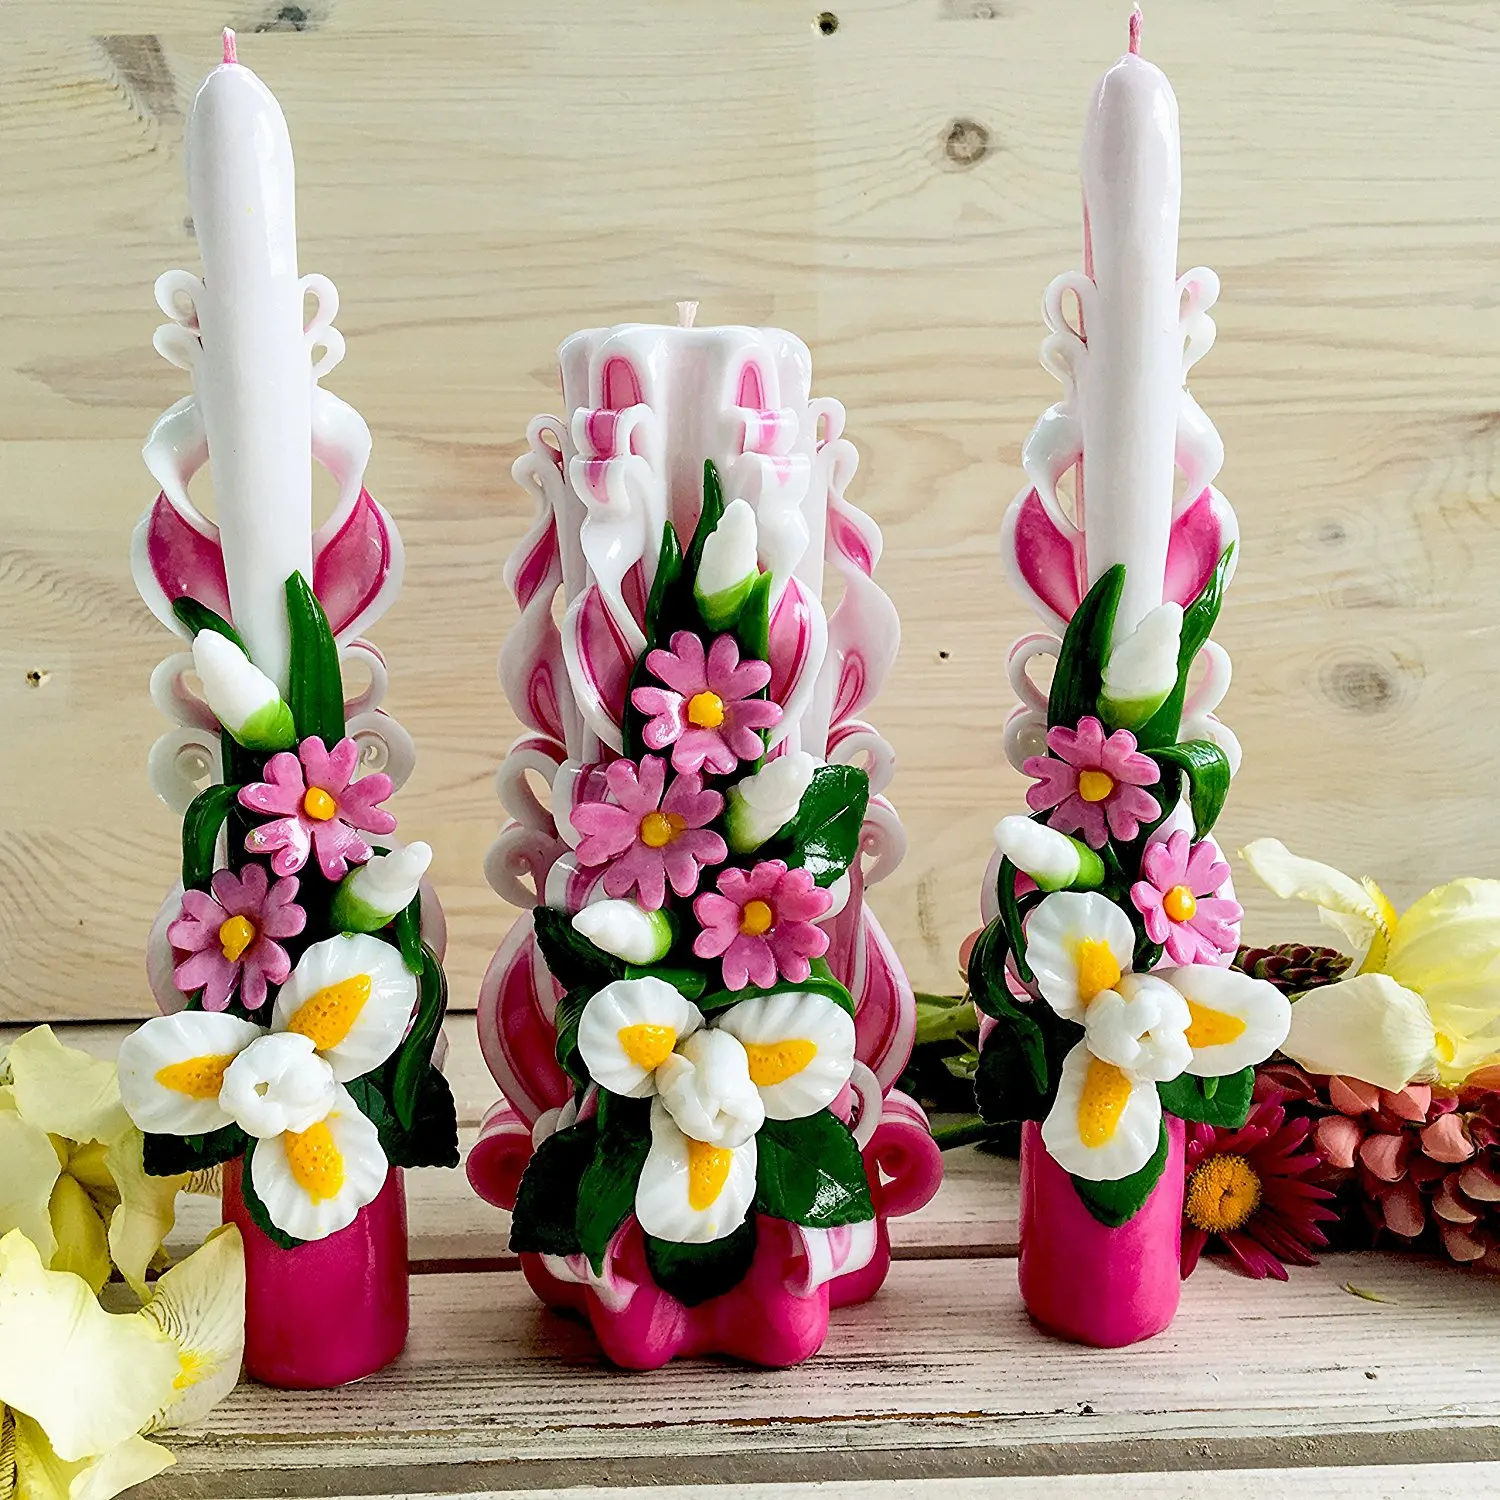 Buy Pink Unity Candles Carved Candles For Wedding Ceremony